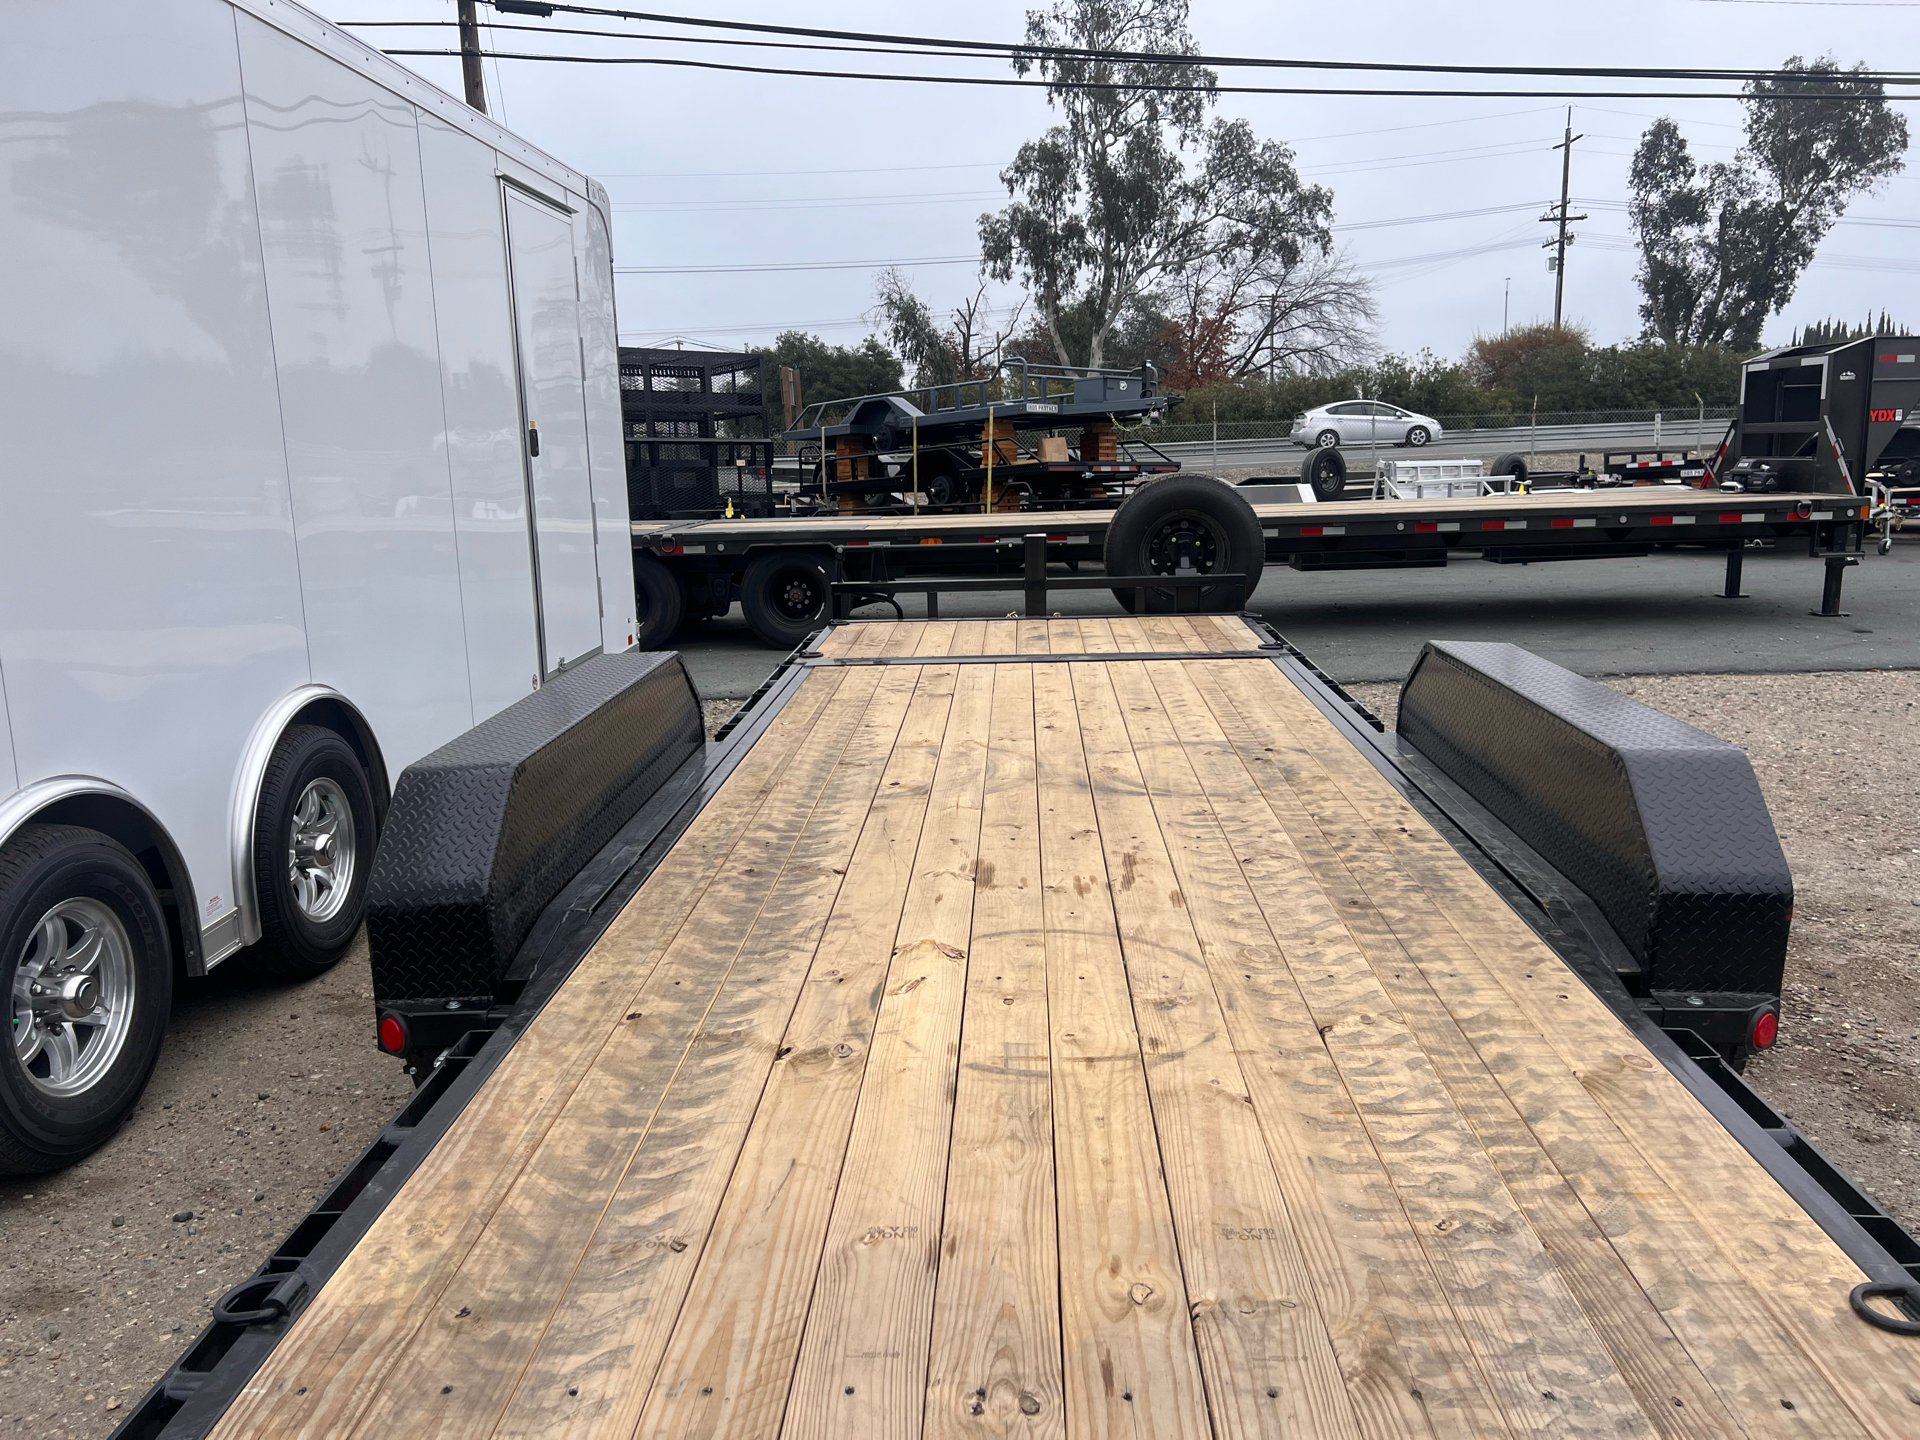 2023 PJ Trailers 6 in. Channel Equipment Tilt (T6) 20 ft. in Acampo, California - Photo 6